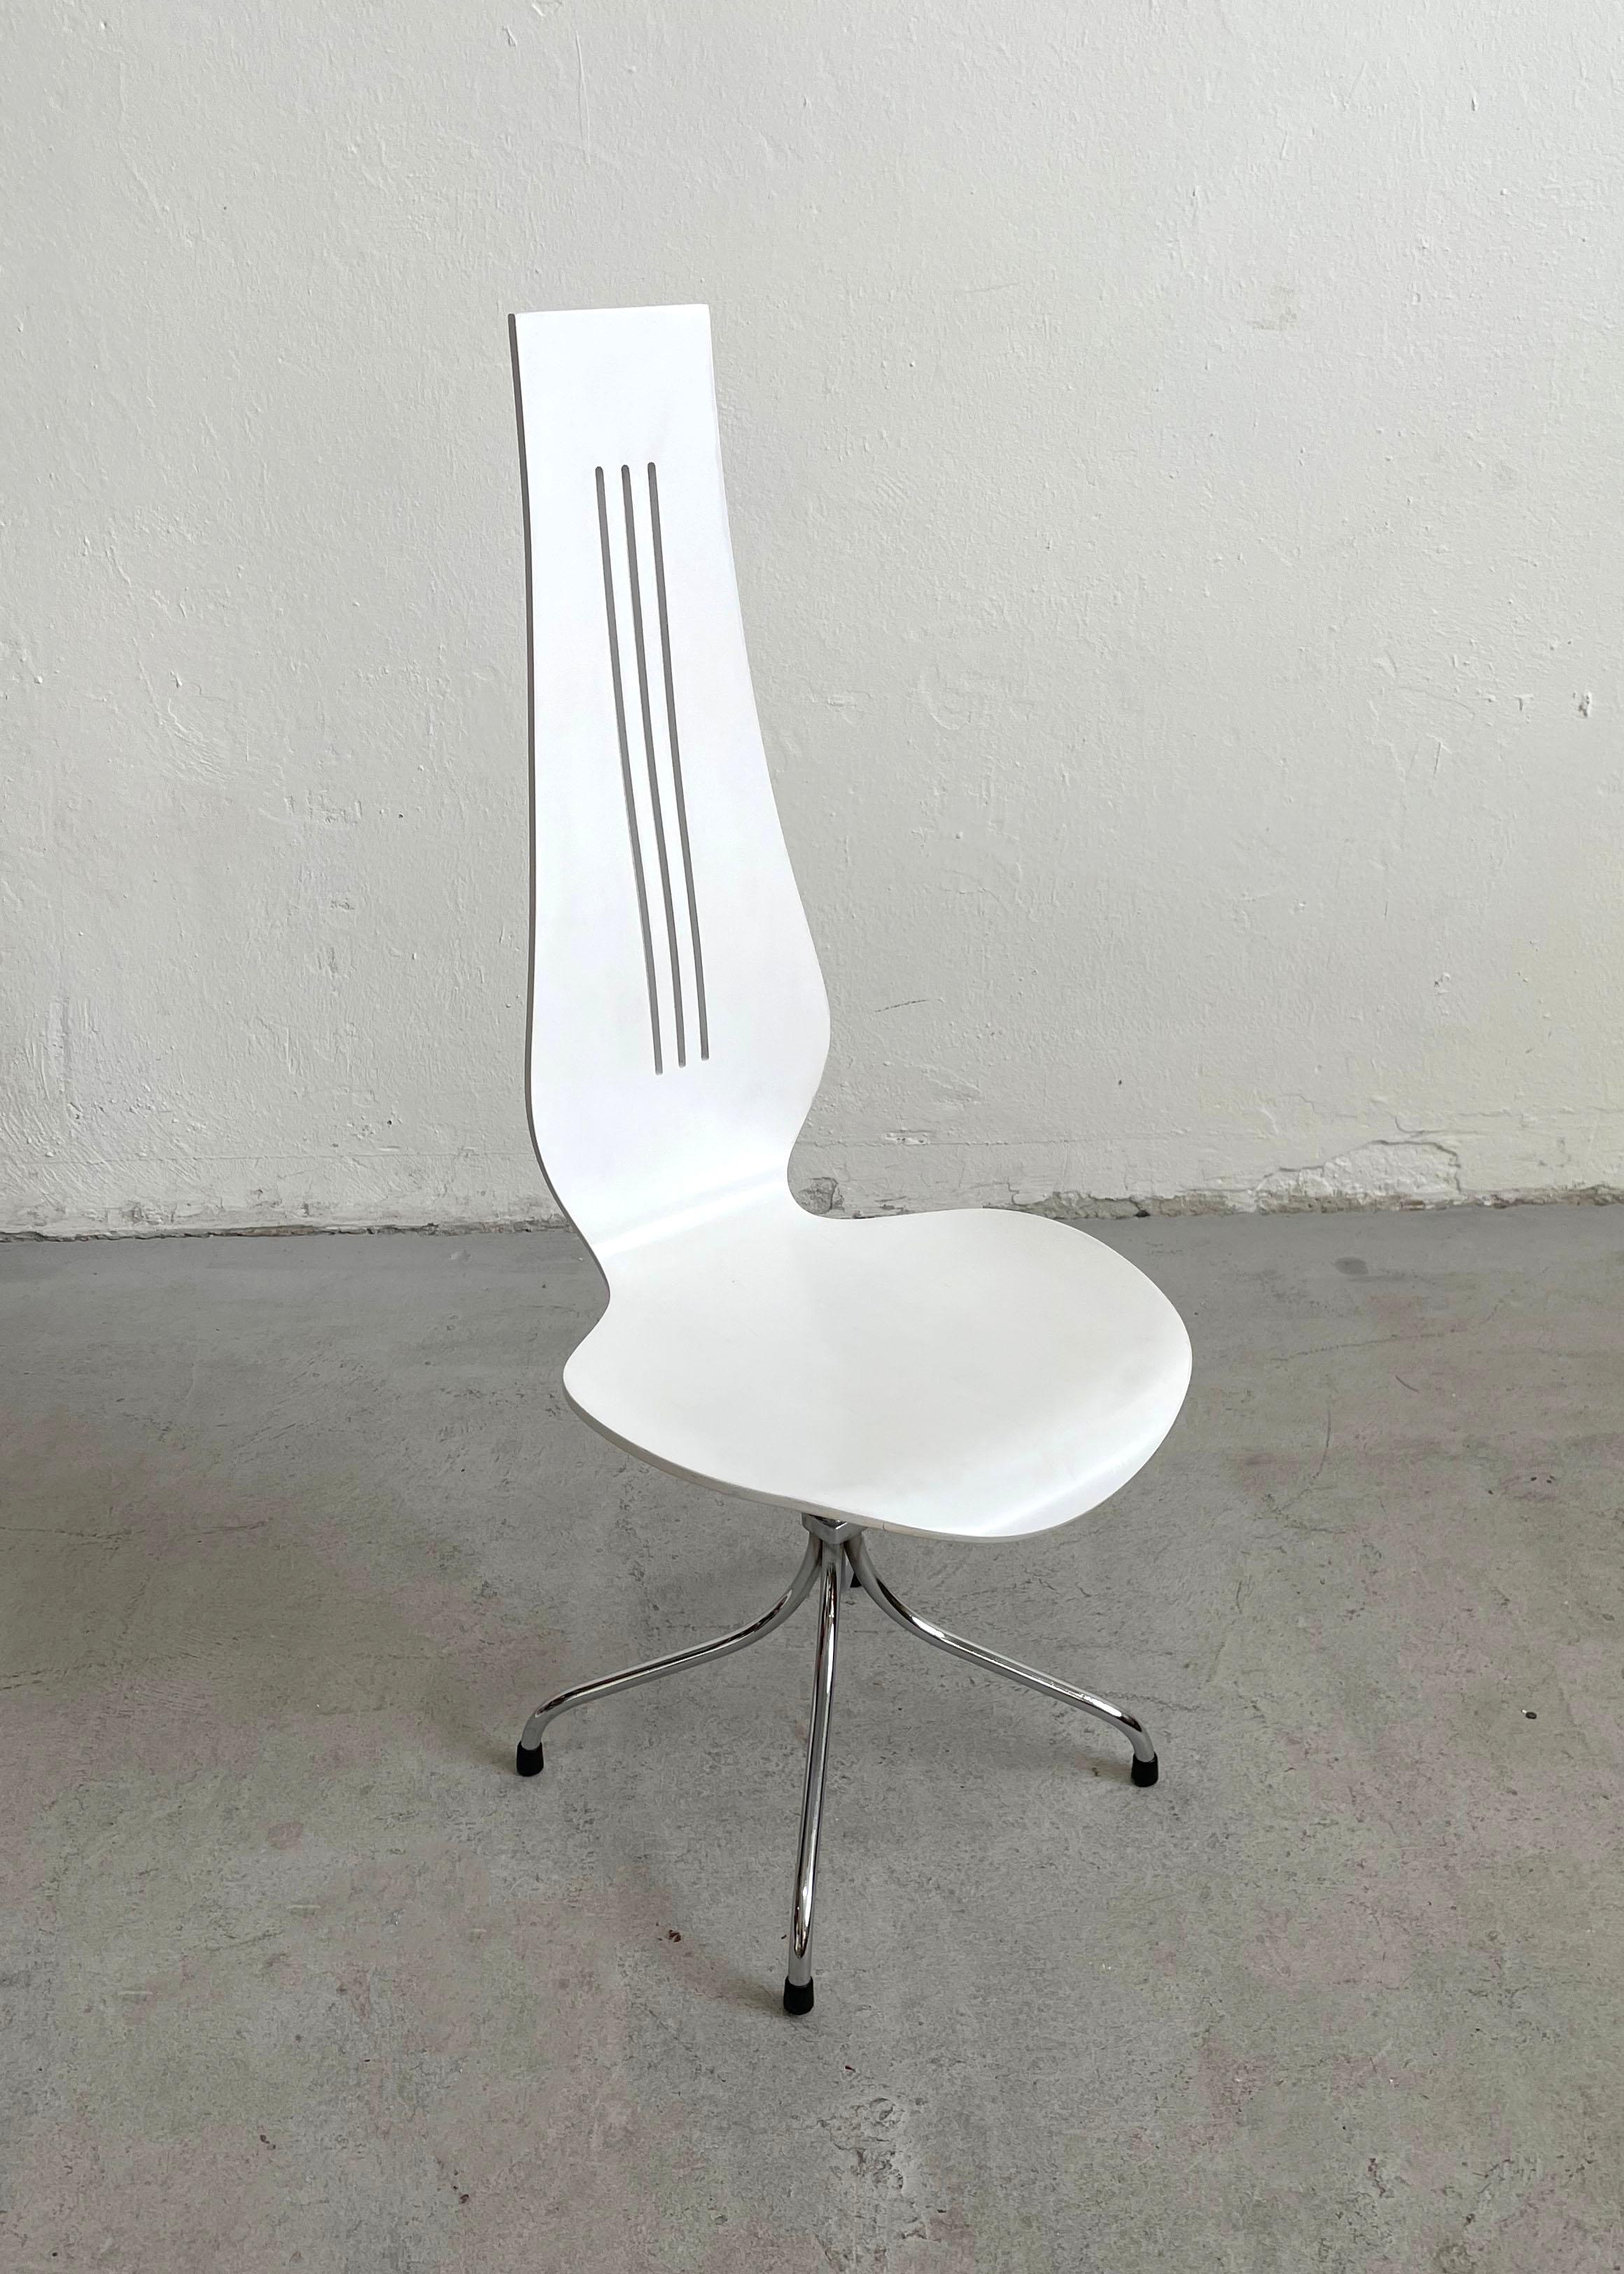 Steel Set of 6 Mid-Century Modern White Dining Chairs by Theo Häberli 1960 Switzerland For Sale